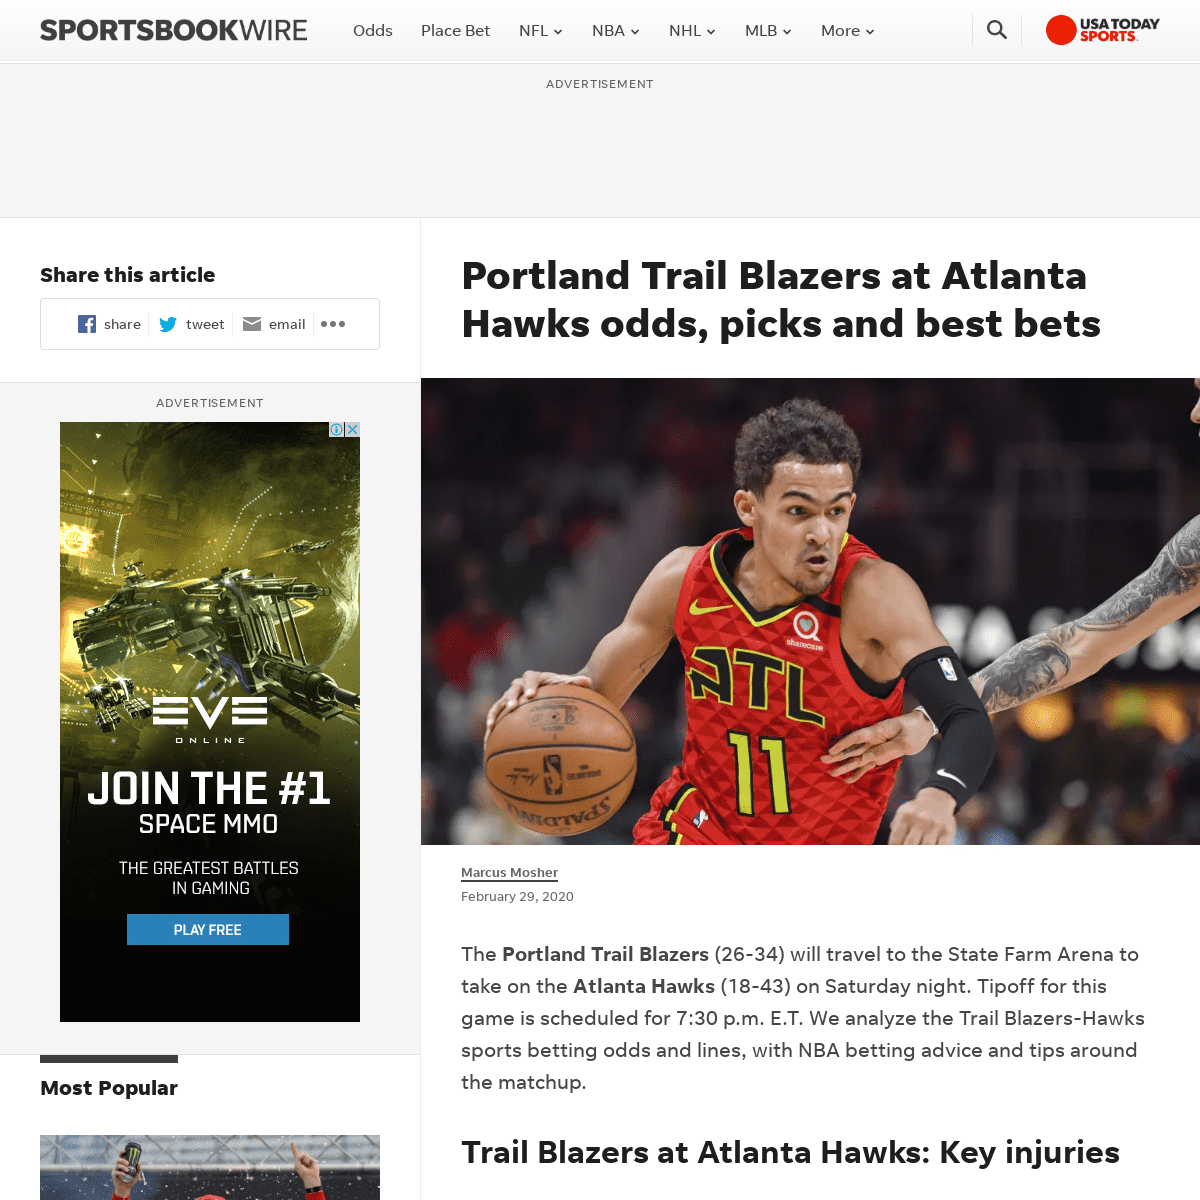 A complete backup of sportsbookwire.usatoday.com/2020/02/29/portland-trail-blazers-at-atlanta-hawks-odds-picks-and-best-bets/